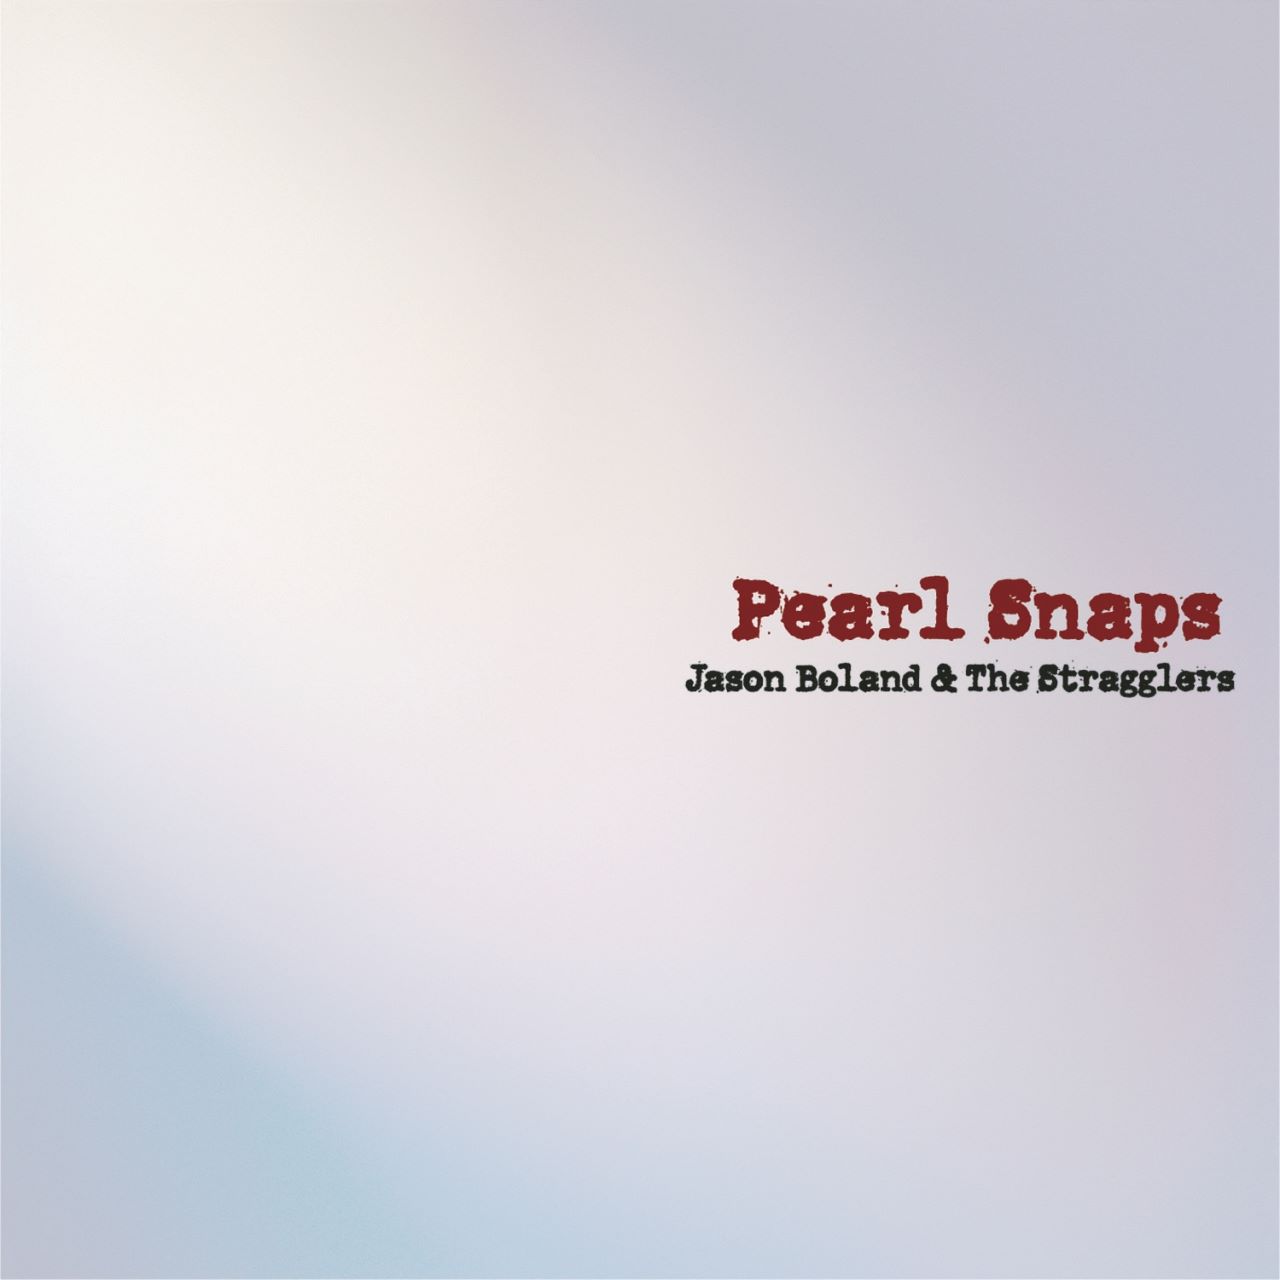 Jason Boland & The Stragglers - Pearl Snaps cover album